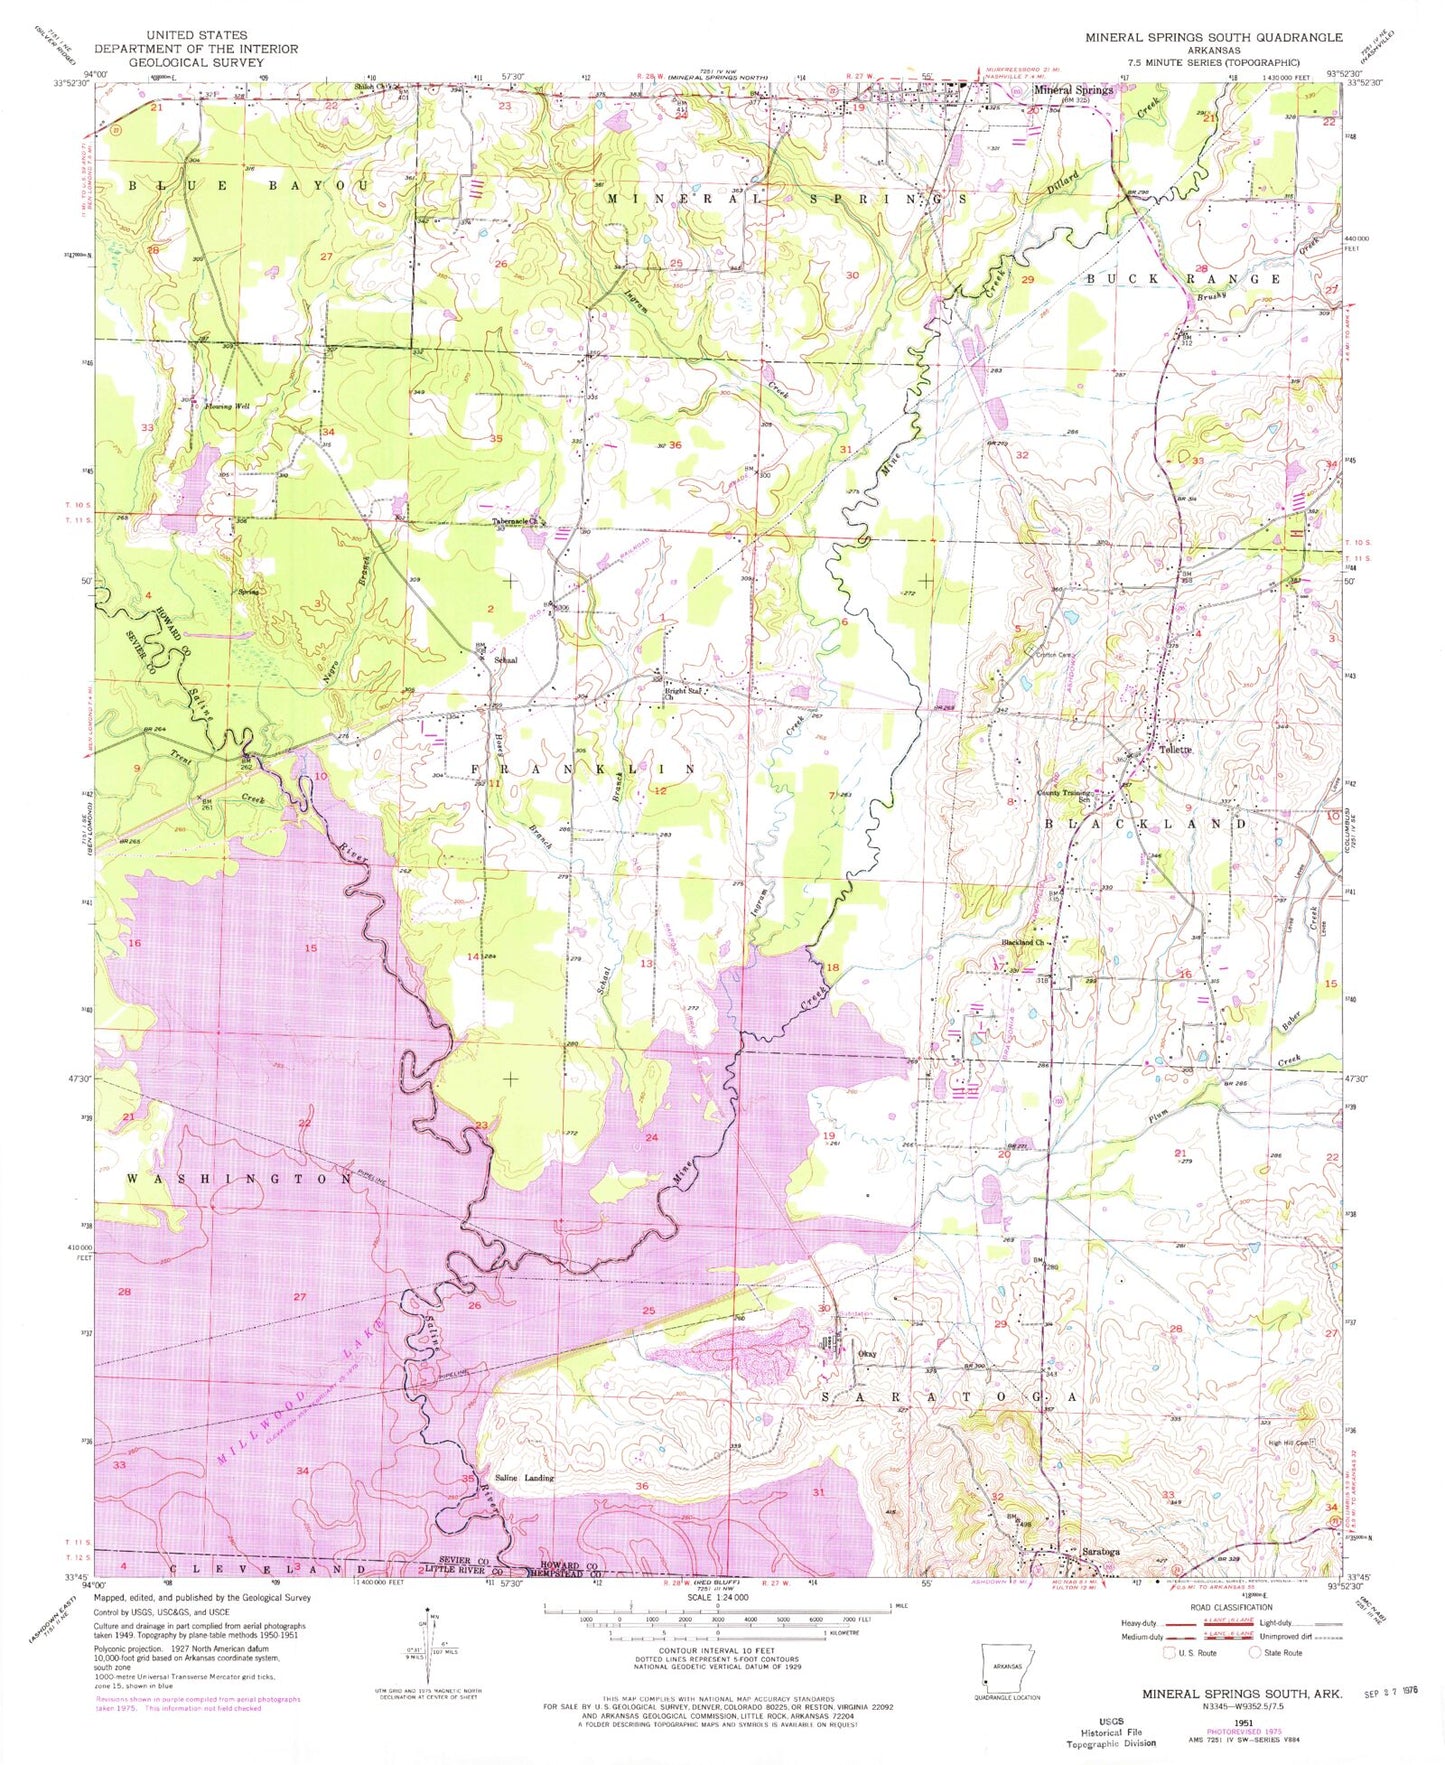 Classic USGS Mineral Springs South Arkansas 7.5'x7.5' Topo Map Image